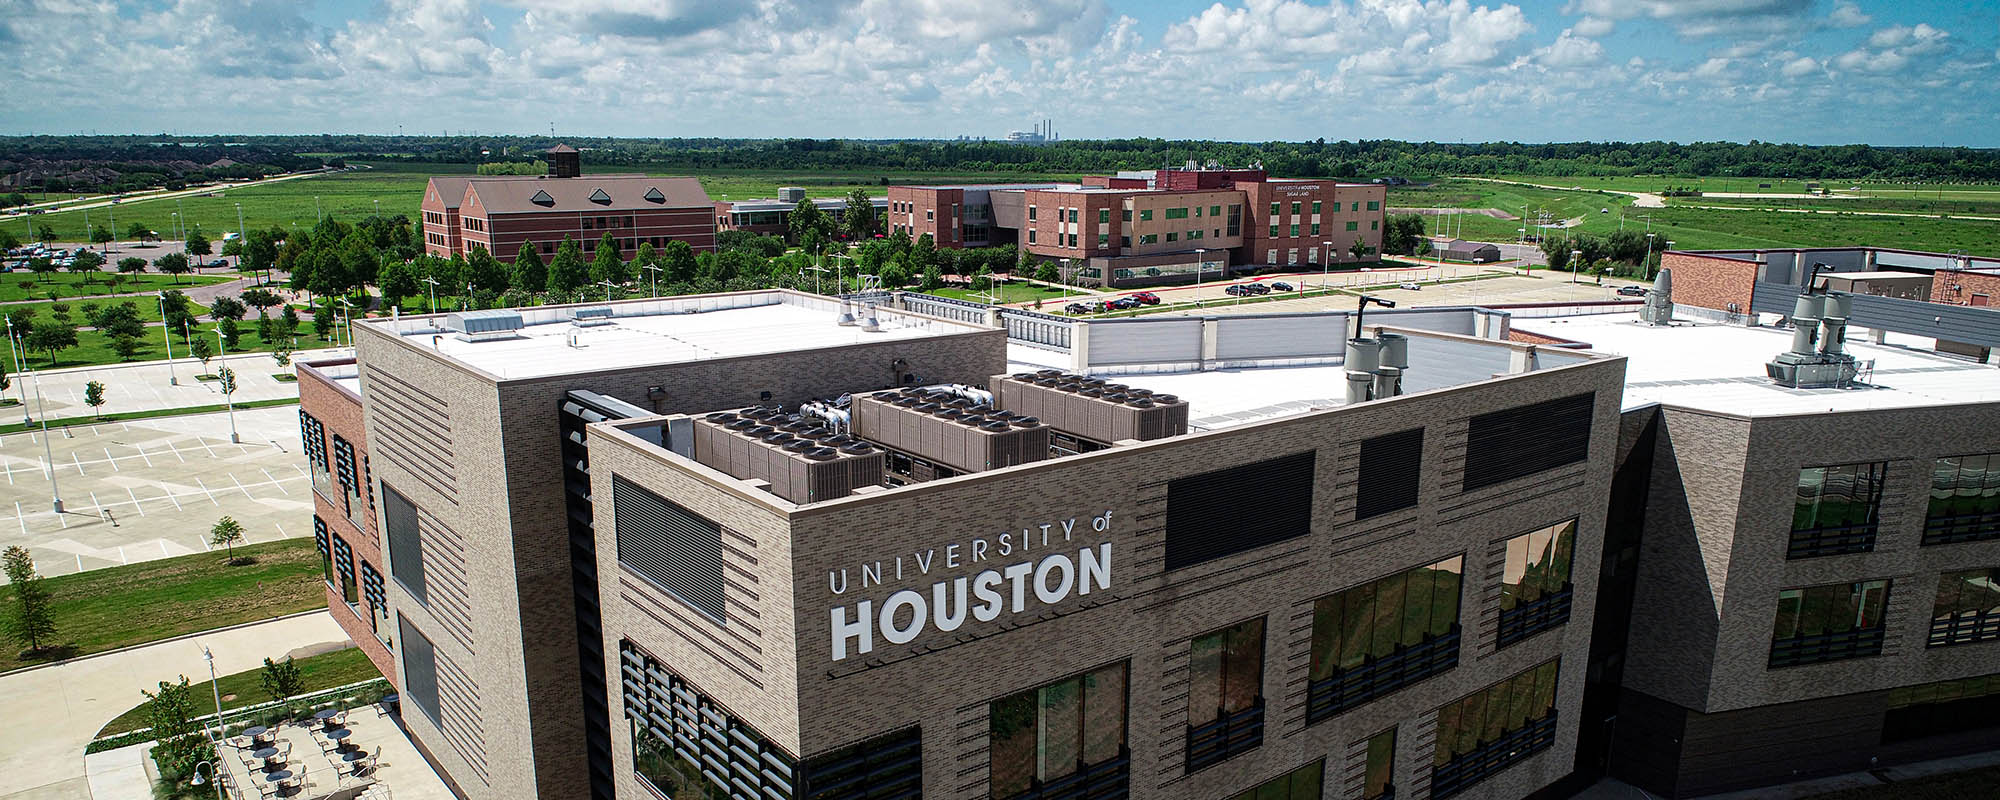 Aerial view of the campus buildings. The University of Houston logo can be seen on the top corner of the foremost building.